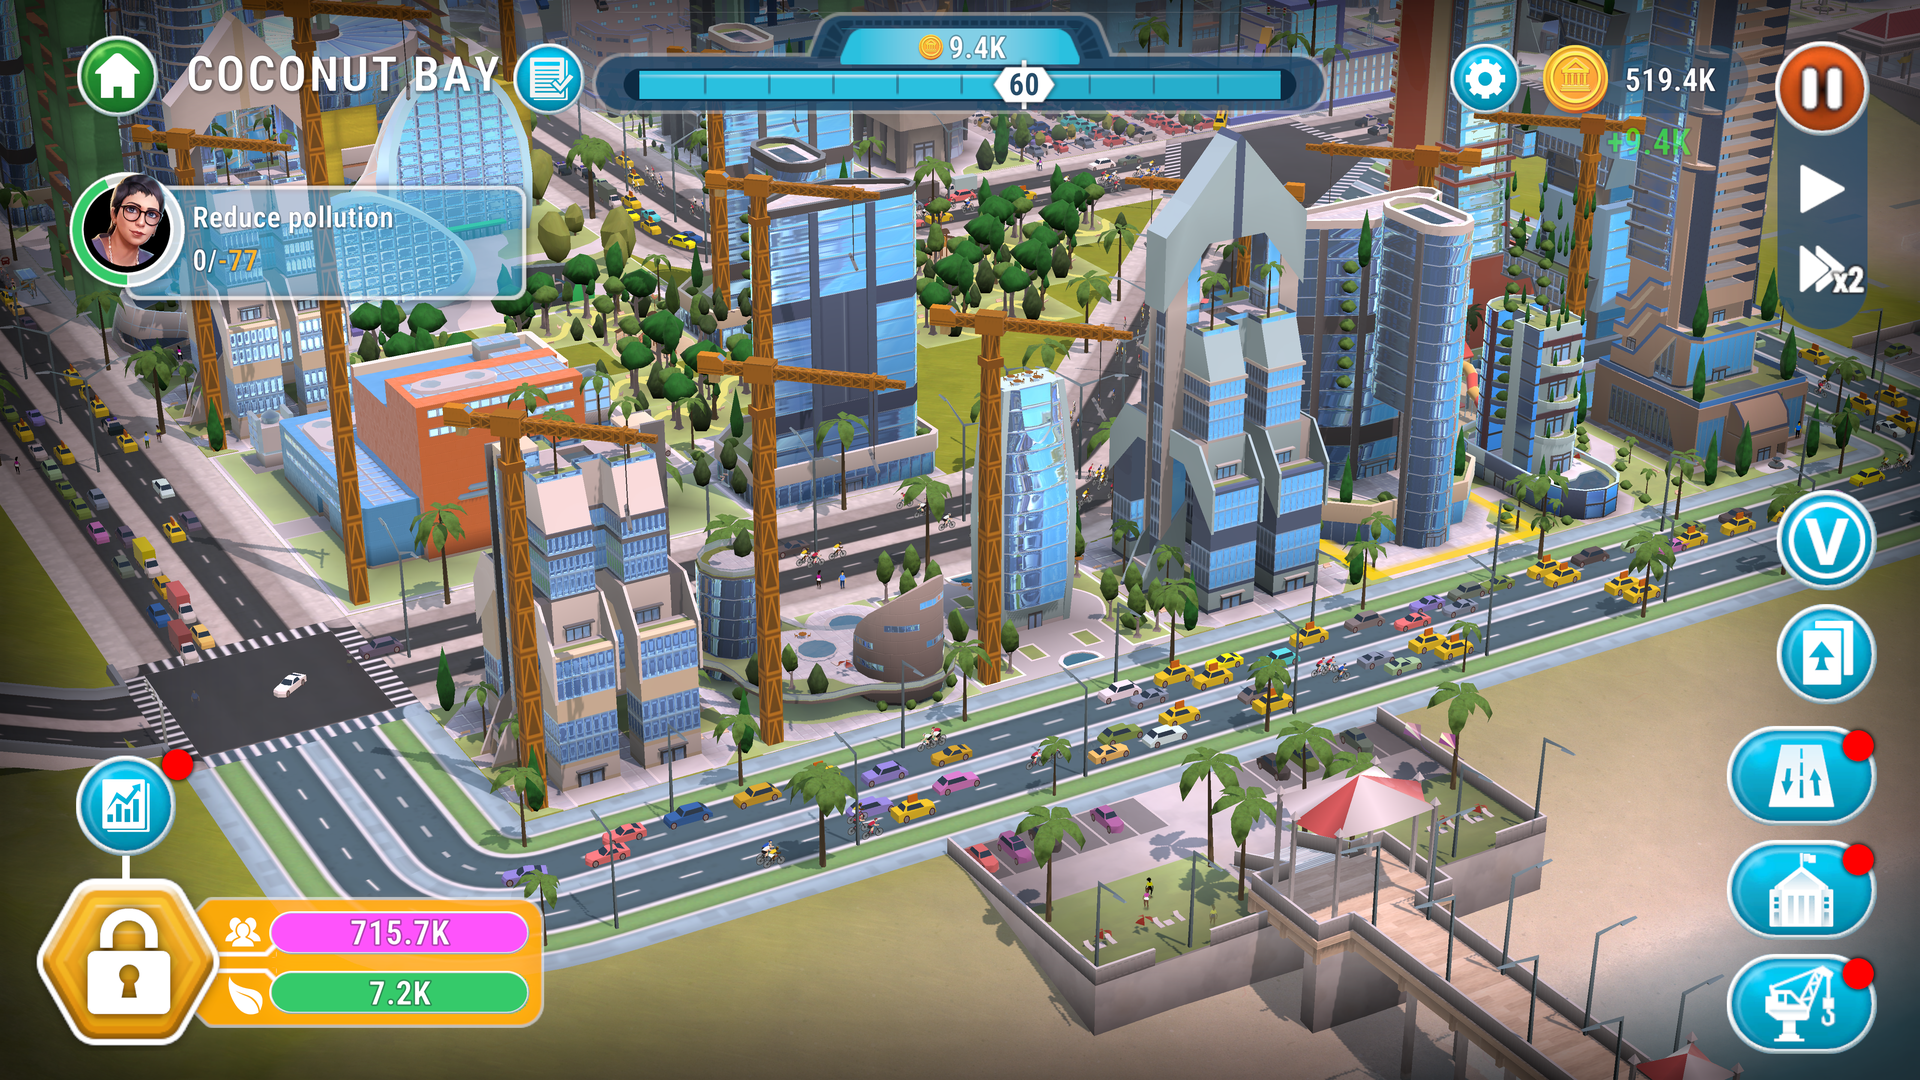 Video game screenshot of a city viewed from an overhead view. A prompt on the screen asks the user to lower the amount of pollution